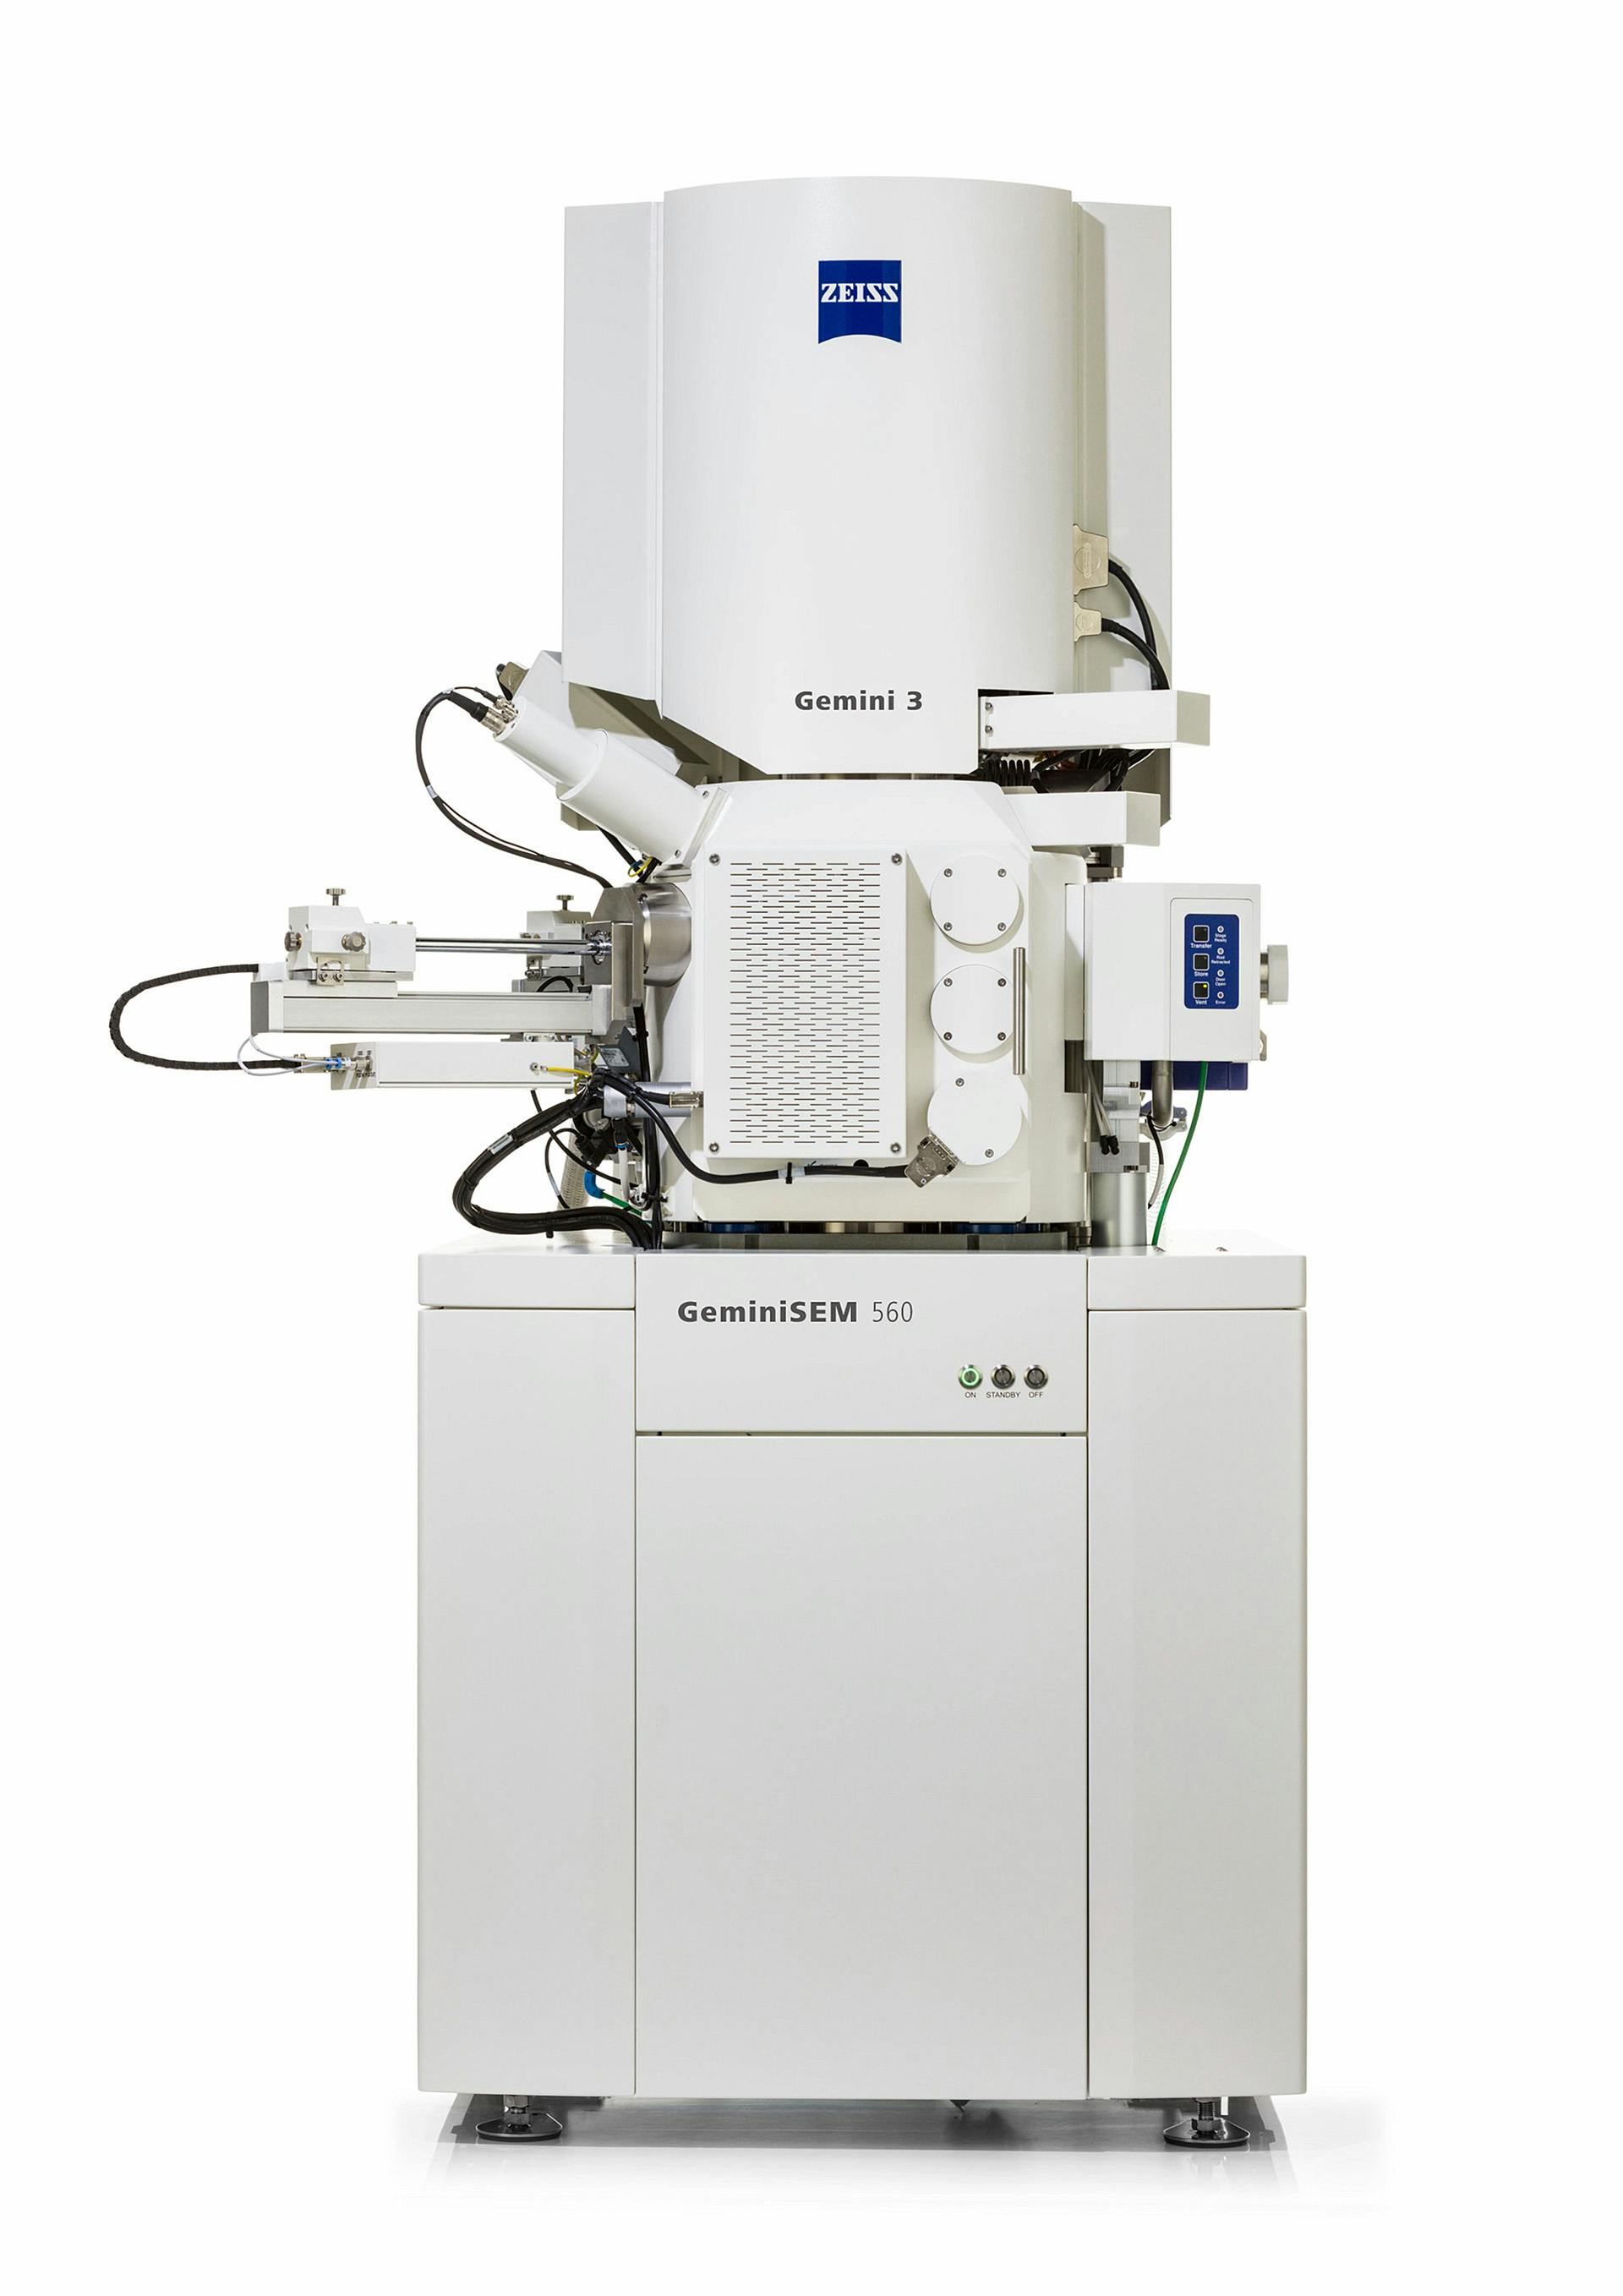 ZEISS GeminiSEM Family, field emission SEMs for highest demands in sub-nanometer imaging, analytics and sample flexibility.